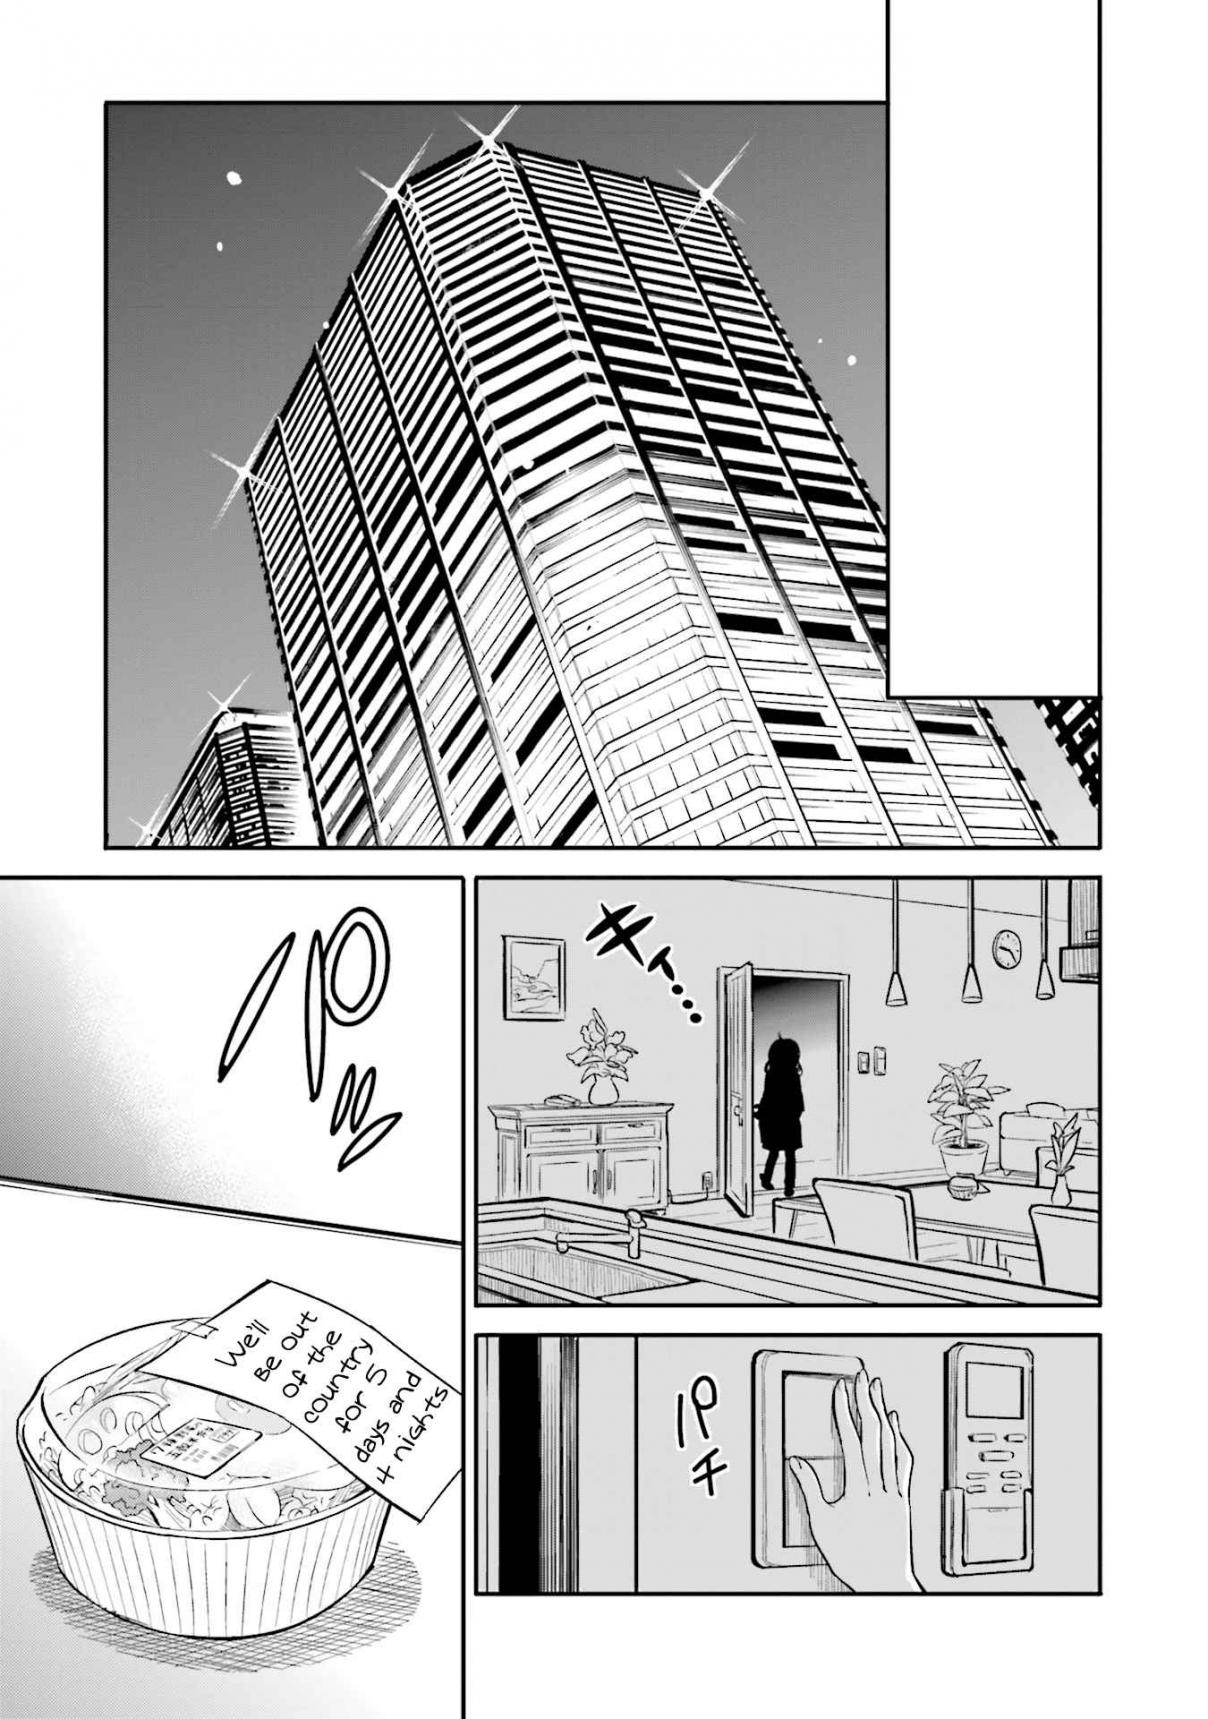 Chotto Ippai! Vol. 2 Ch. 8 I want to help out